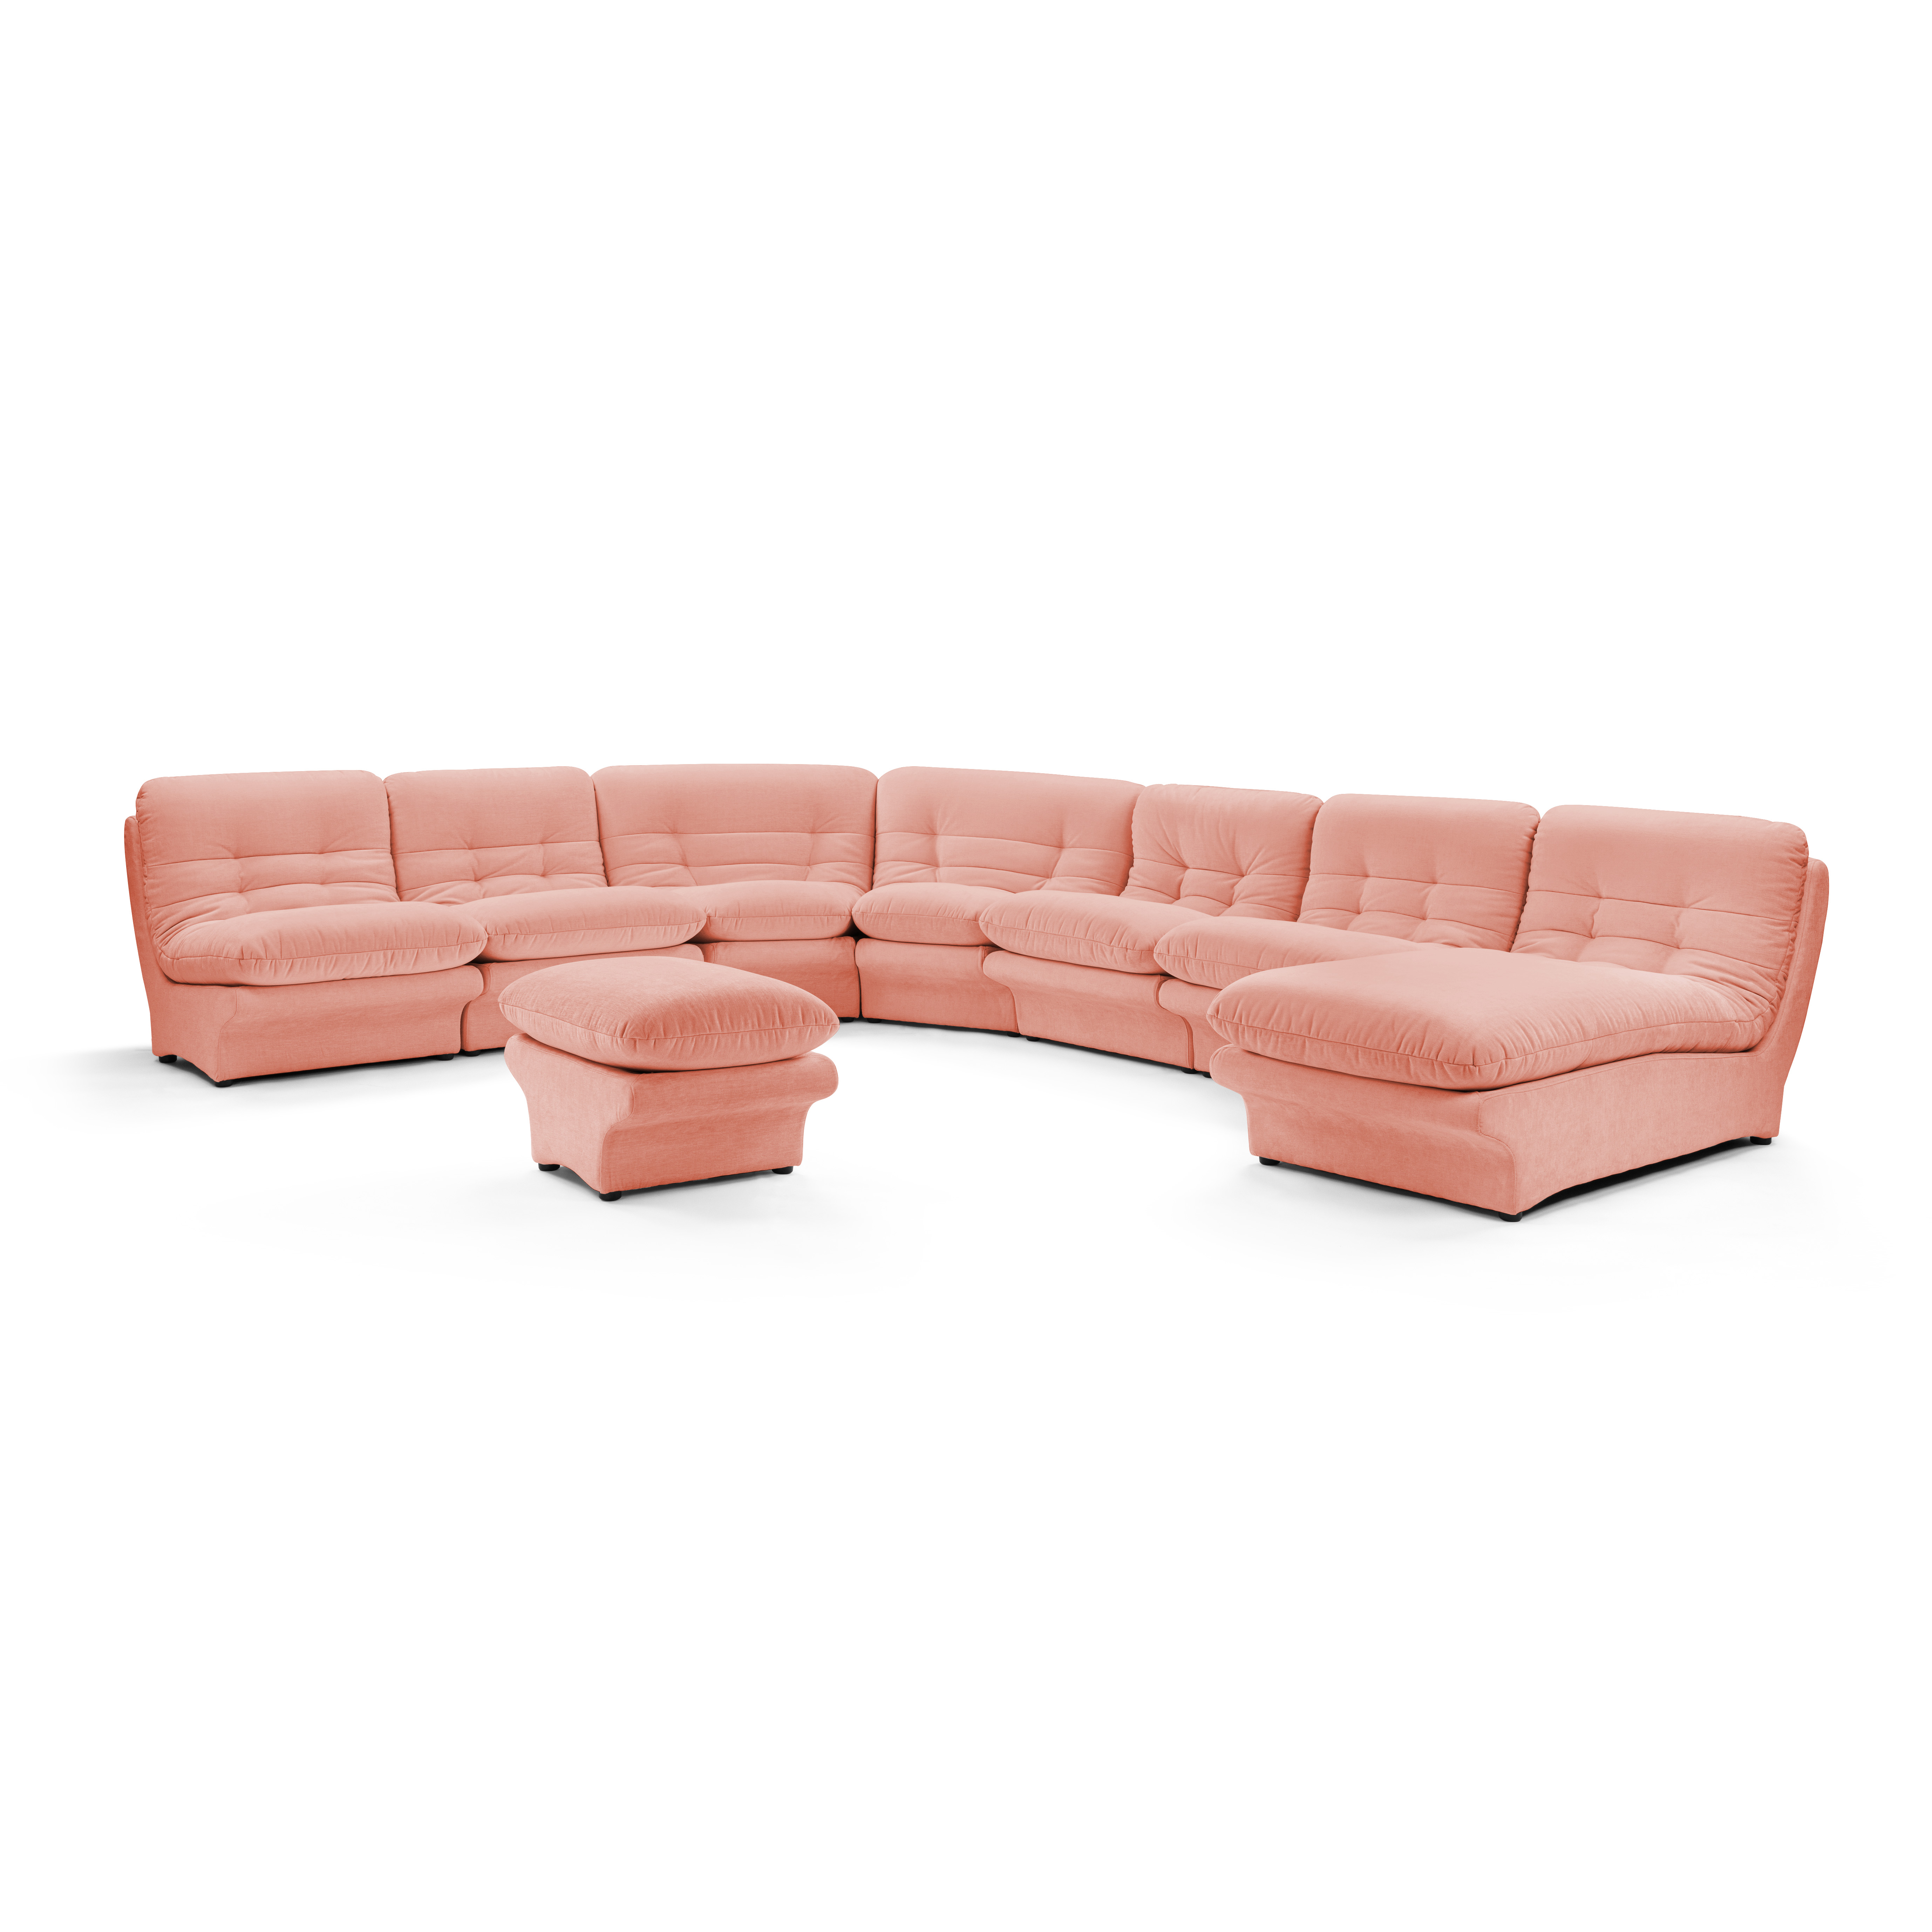 Carsons Mid Century Curved Modular Sectional Sofa / Combination 001-Chenille Helios-Dusty Rose